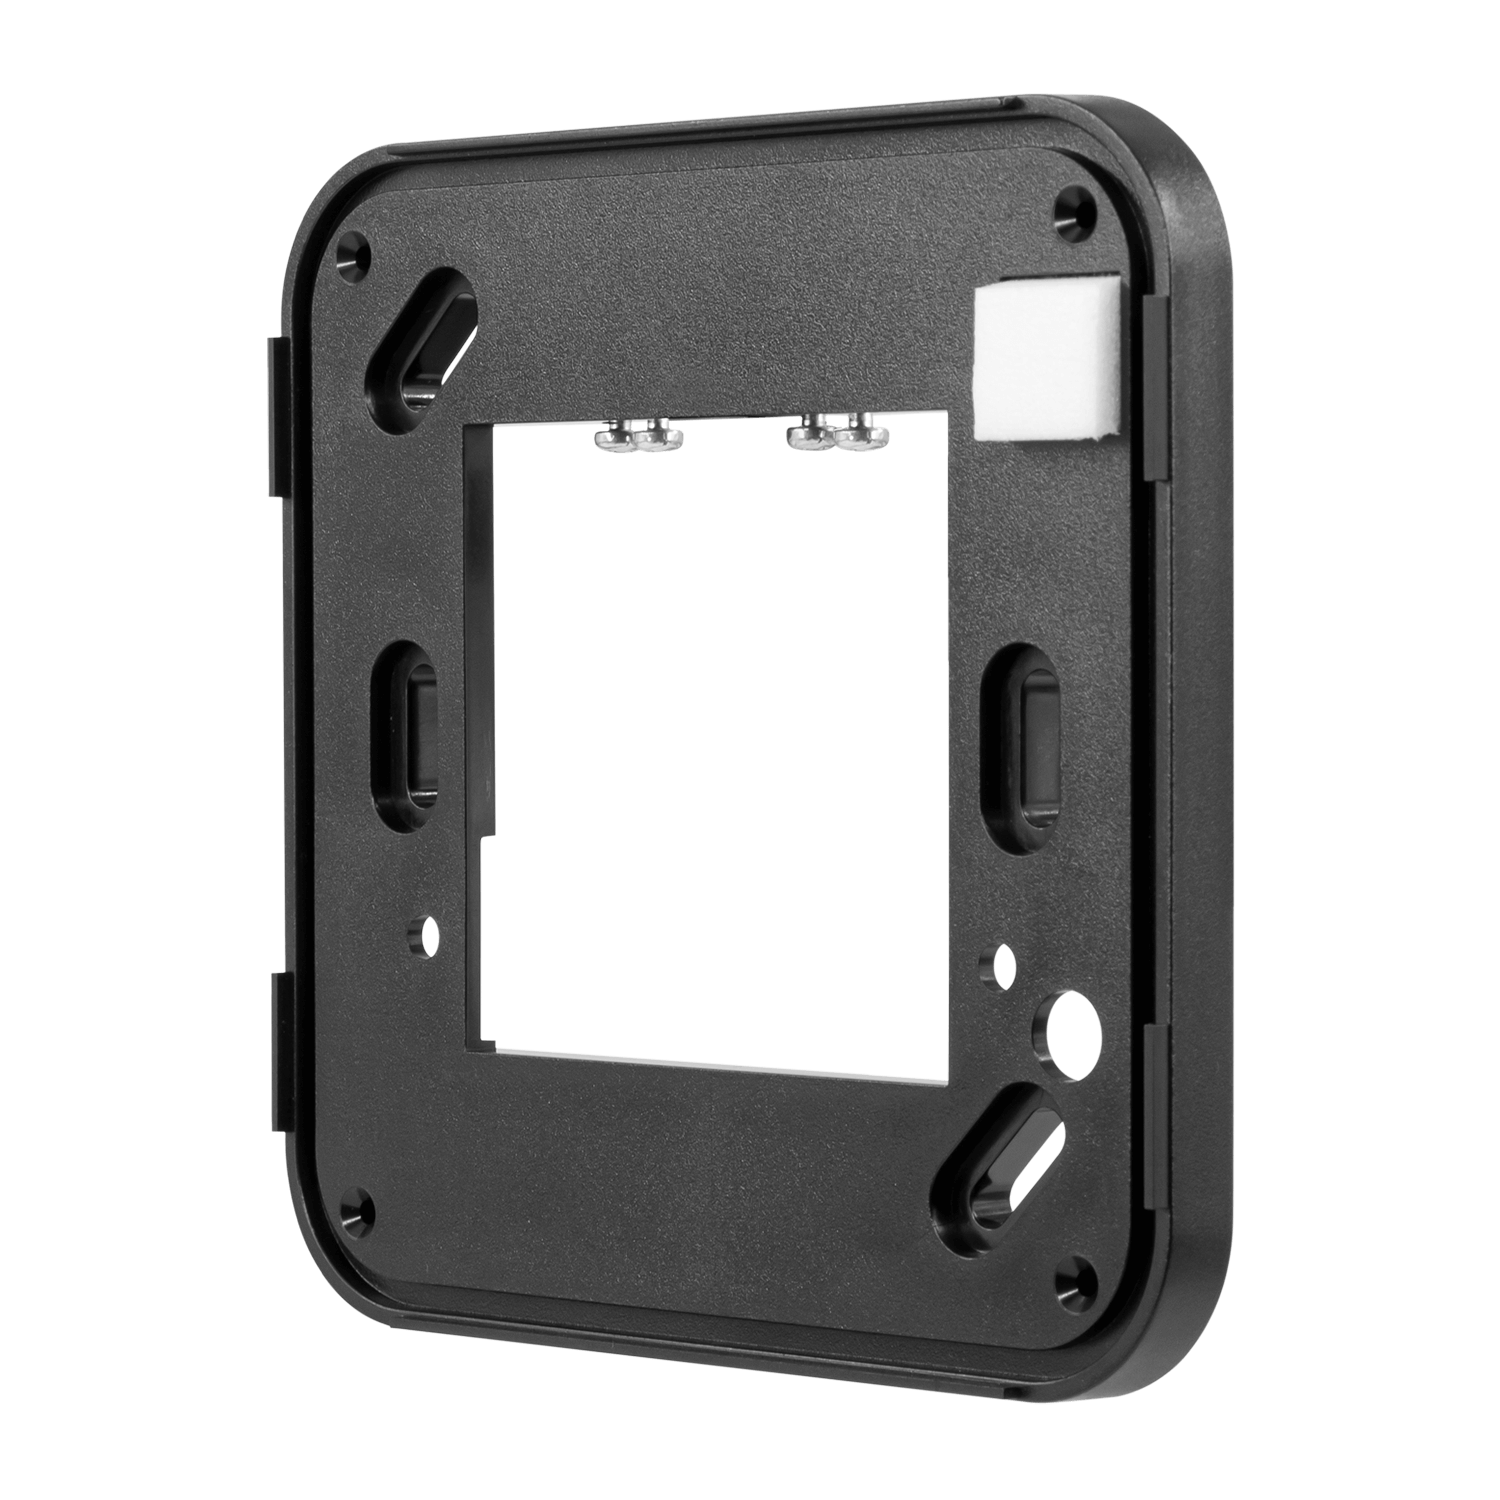 ATS 6 - 6 spacer for access control reader, black, right view